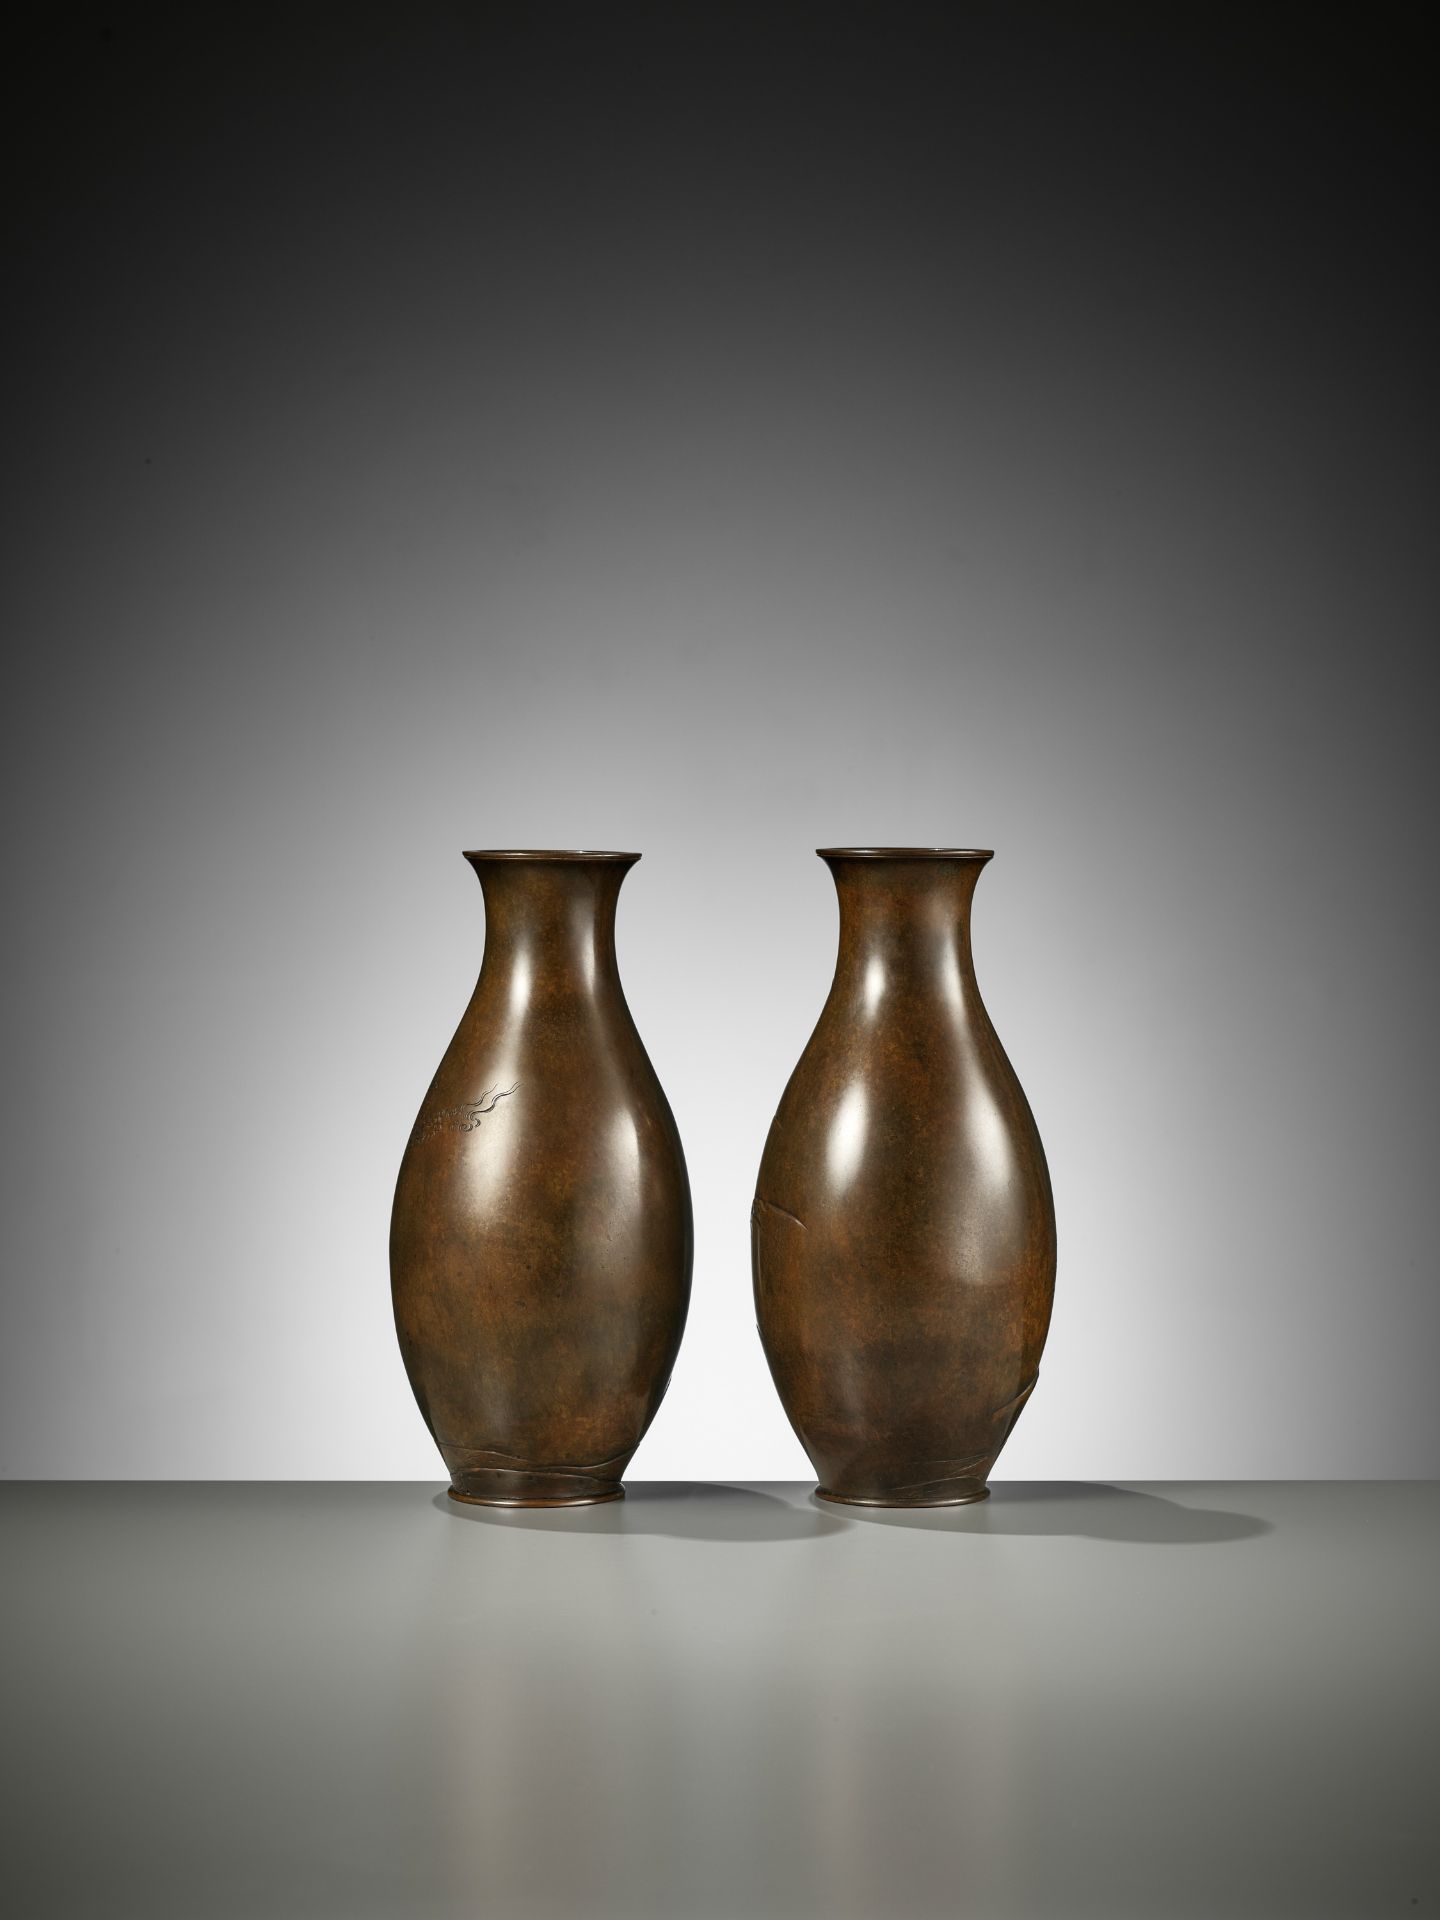 CHOMIN: A SUPERB PAIR OF INLAID BRONZE VASES WITH MINOGAME AND GEESE - Image 7 of 11